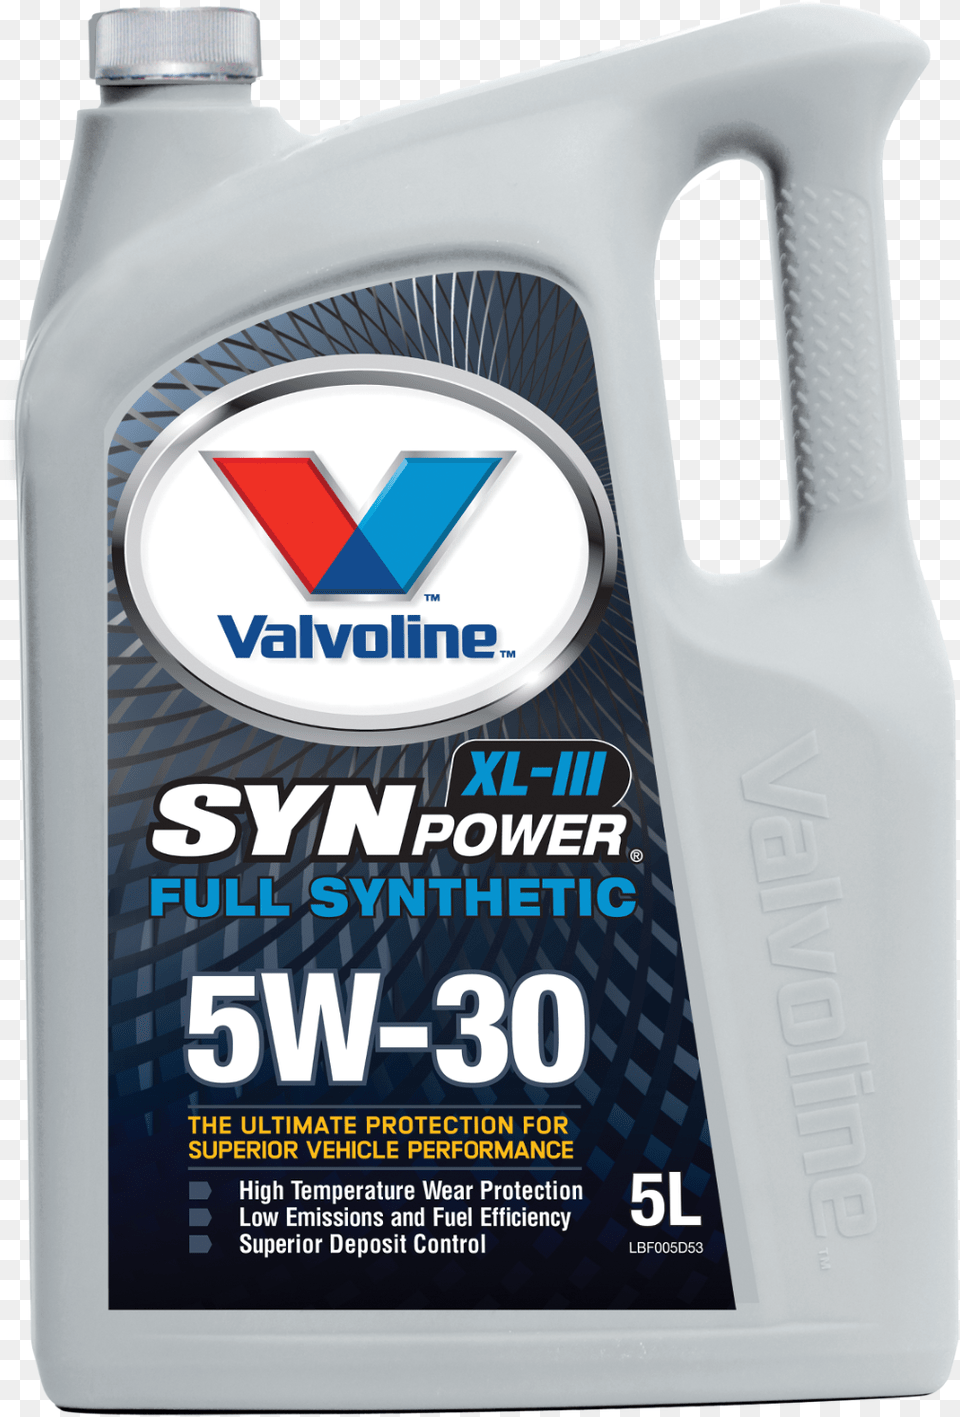 Norton Secured Synpower Xl Iii C3 5w, Bottle, Shaker Free Png Download